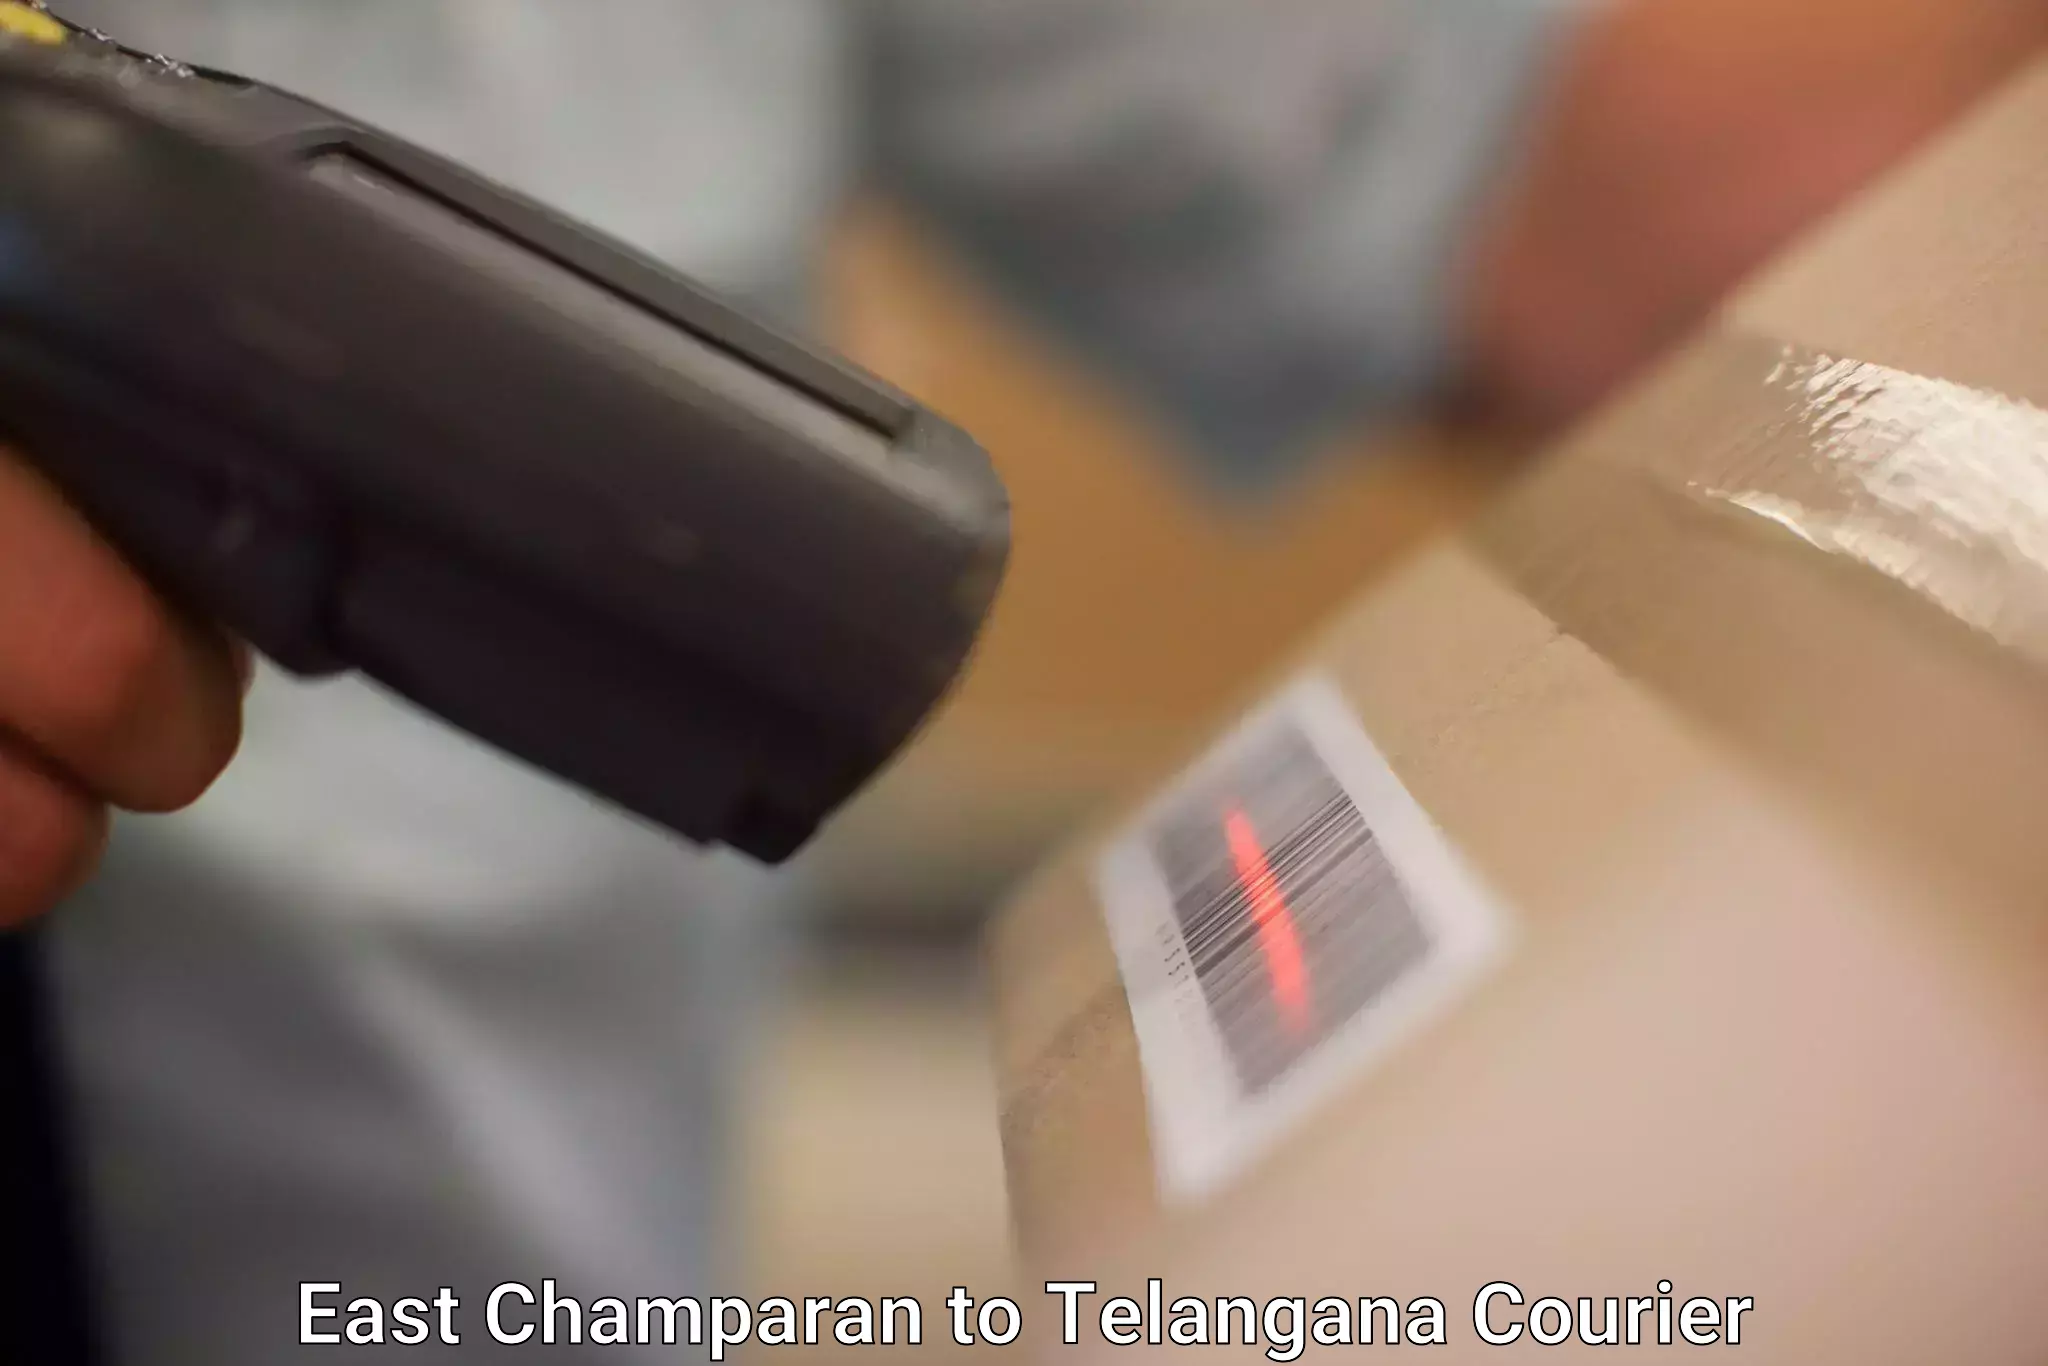 Fragile item shipping in East Champaran to Jannaram